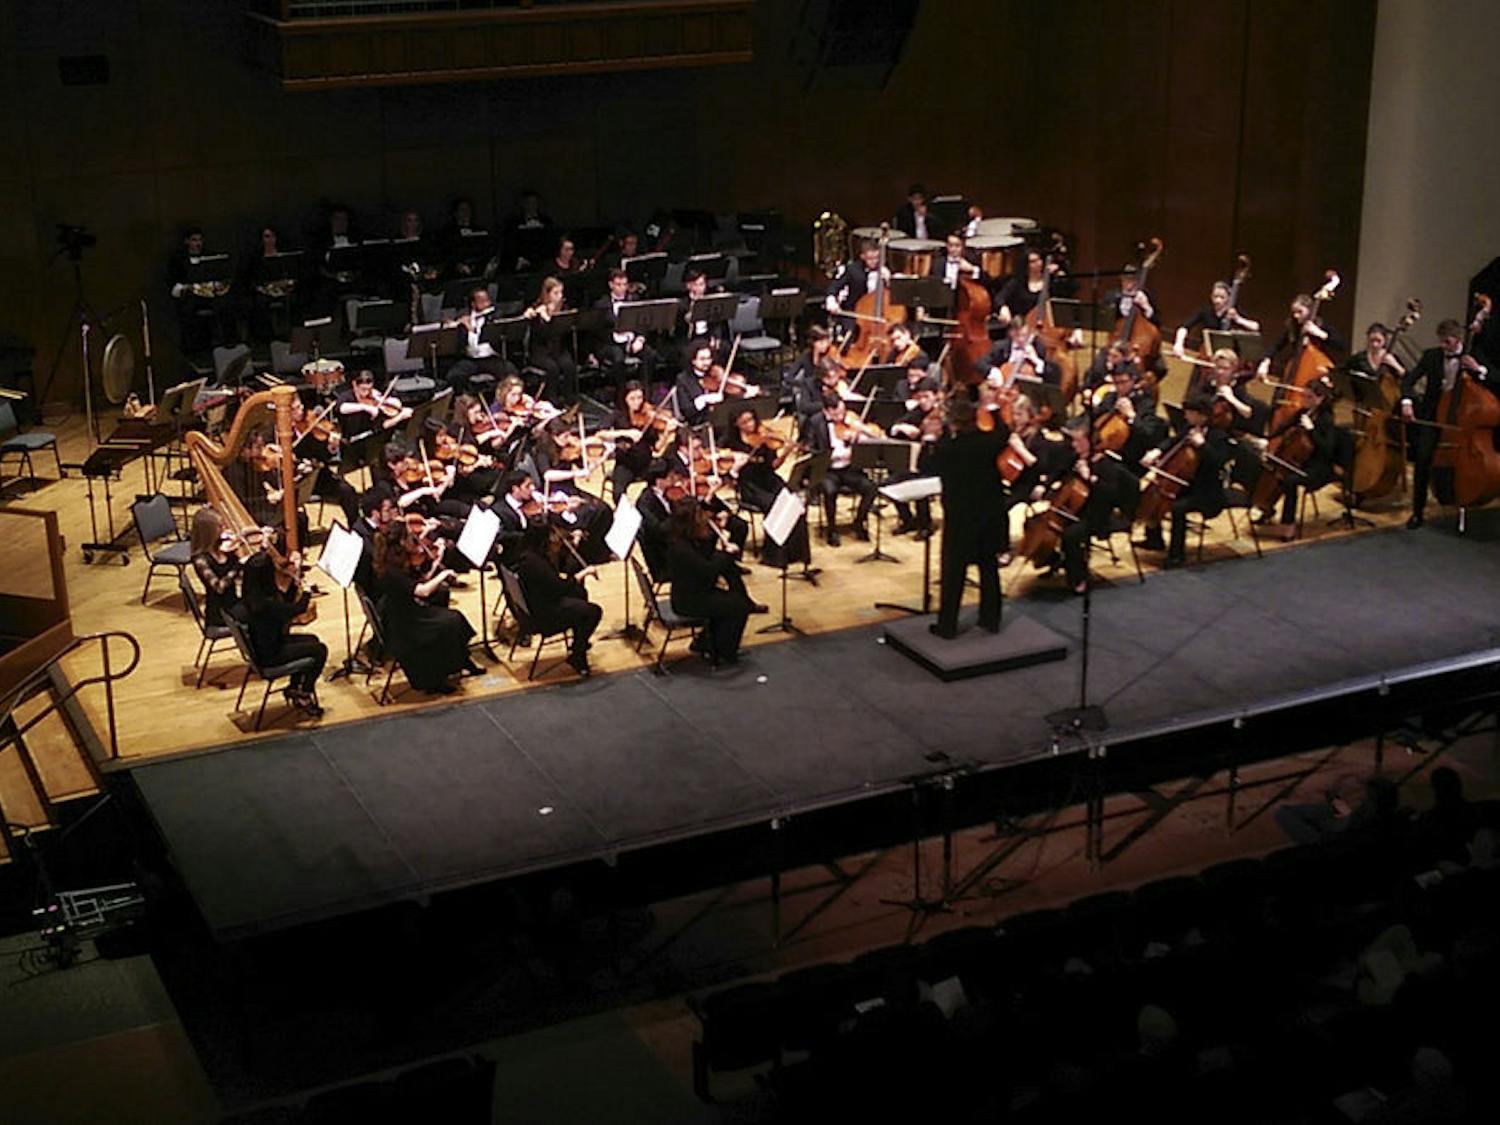 In the University Auditorium, February 5th, the University of Florida Symphony Orchestra performing their 47th annual Concerto Competition Winners concert.